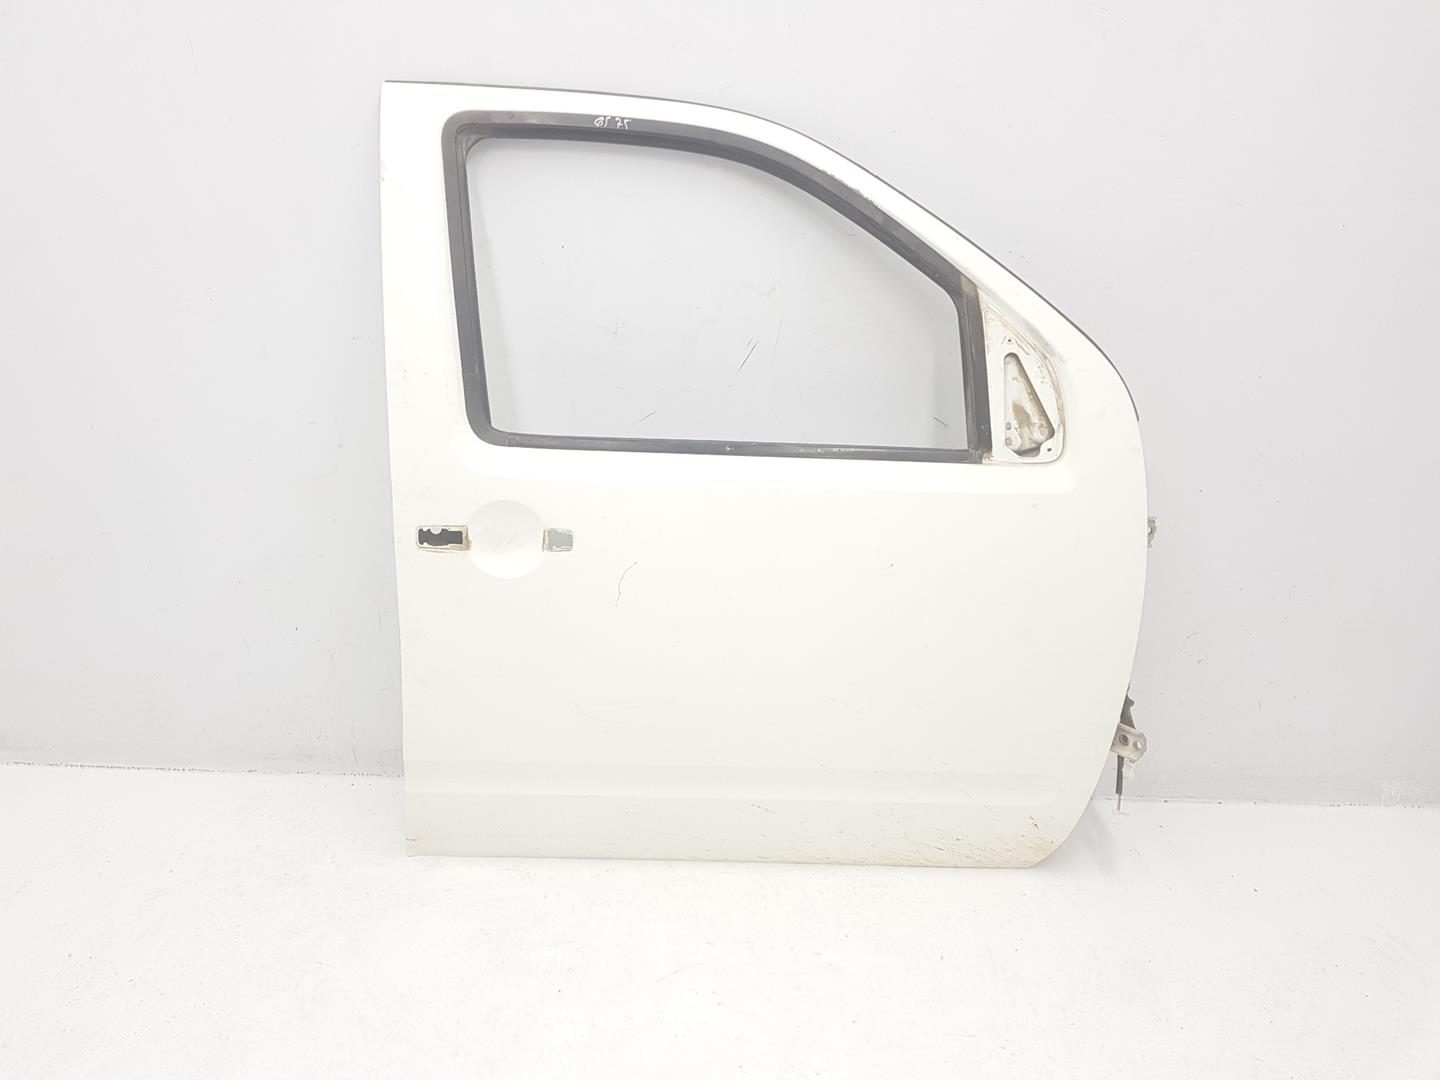 NISSAN Pathfinder R51 (2004-2014) Front Right Door 80100EB330, 80100EB330, COLORBLANCOSOLIDO326 22485495